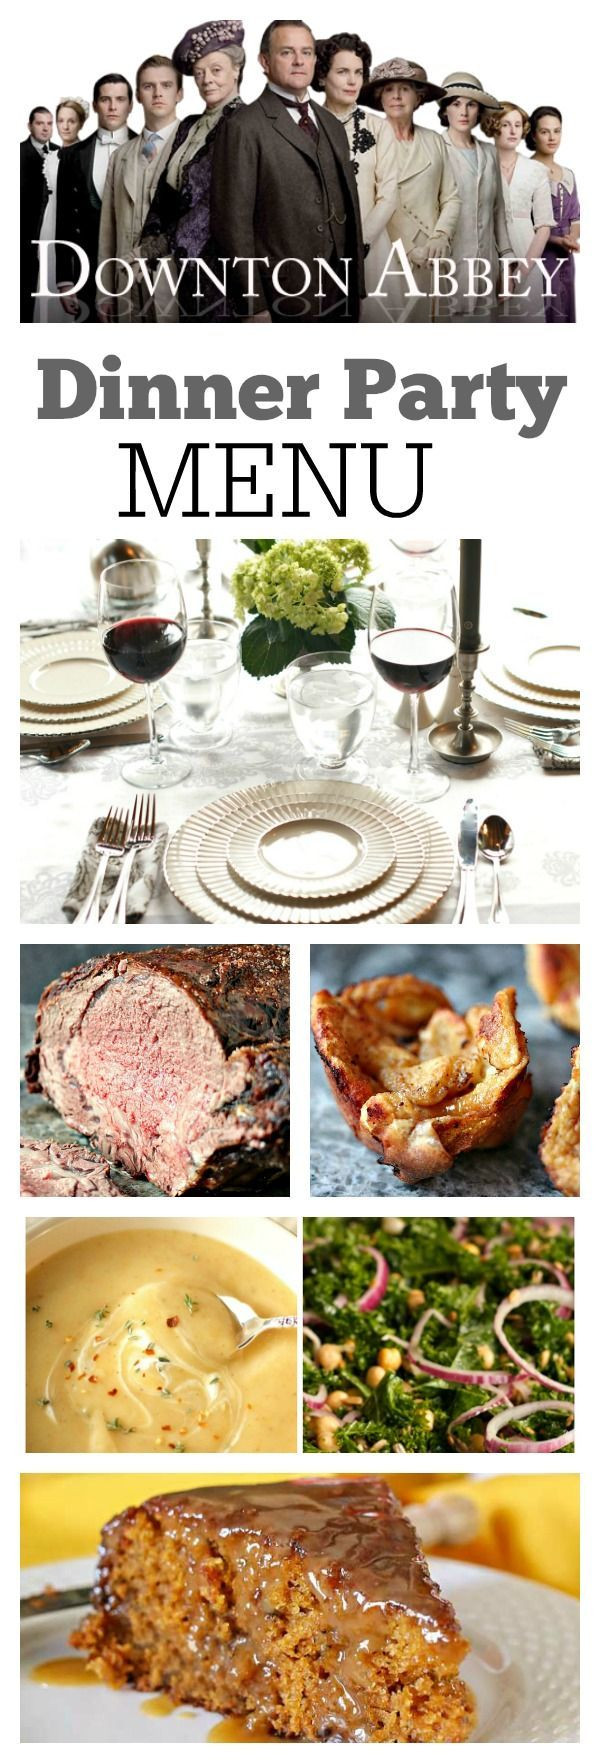 Dinner Party Porn
 25 great ideas about Birthday Menu on Pinterest